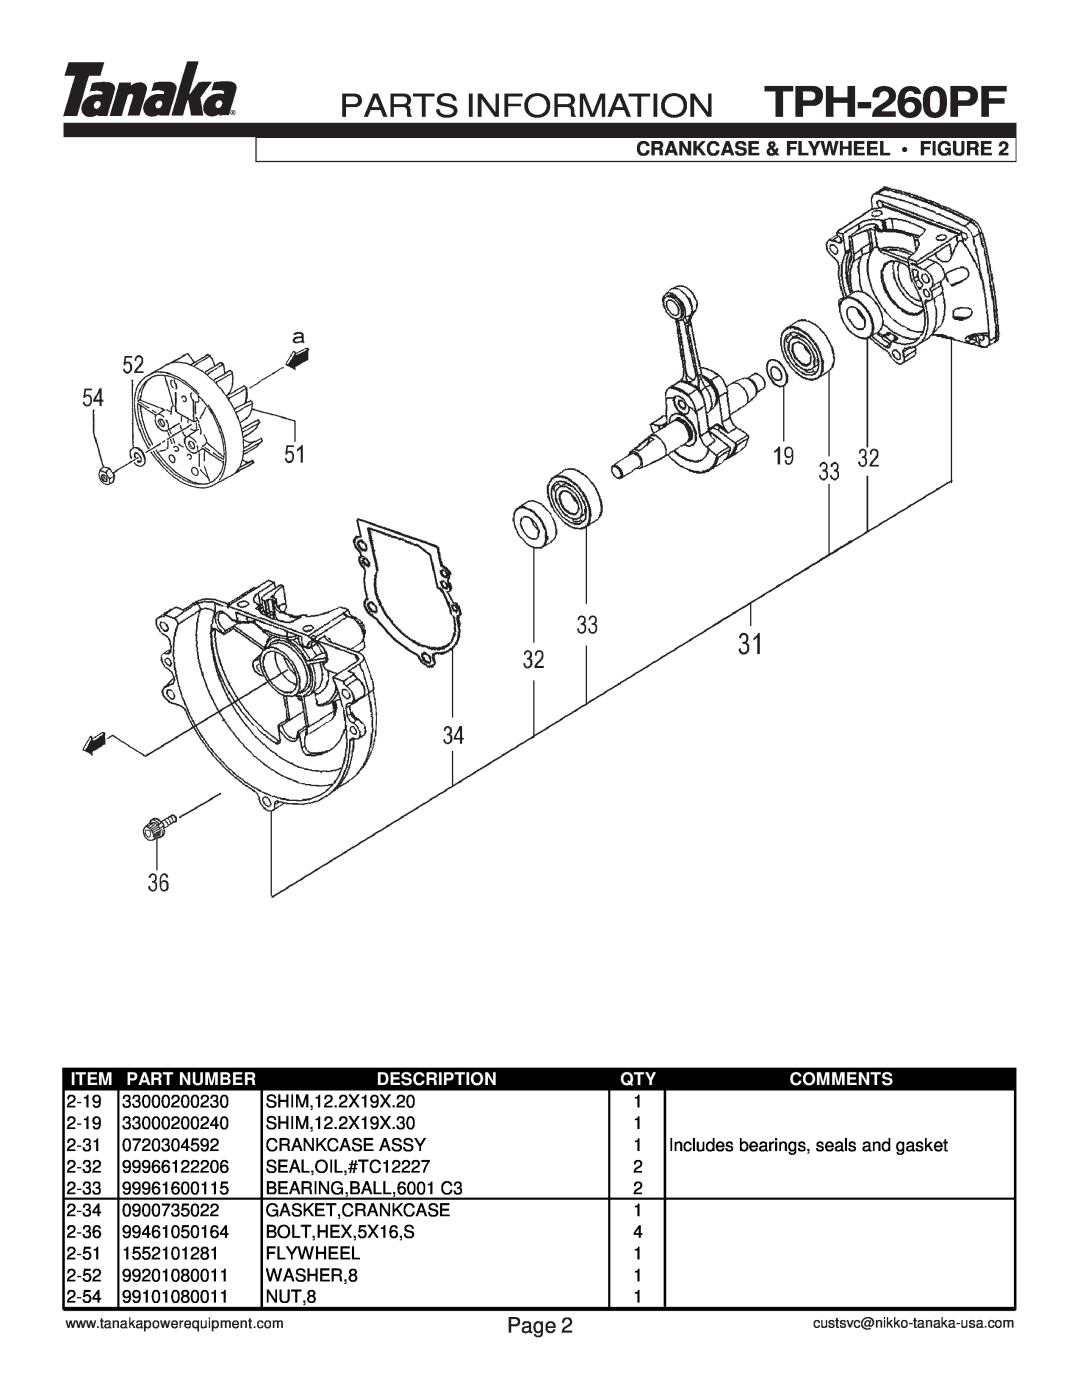 Tanaka manual Crankcase & Flywheel • Figure, PARTS INFORMATION TPH-260PF, Page, Part Number, Description, Comments 